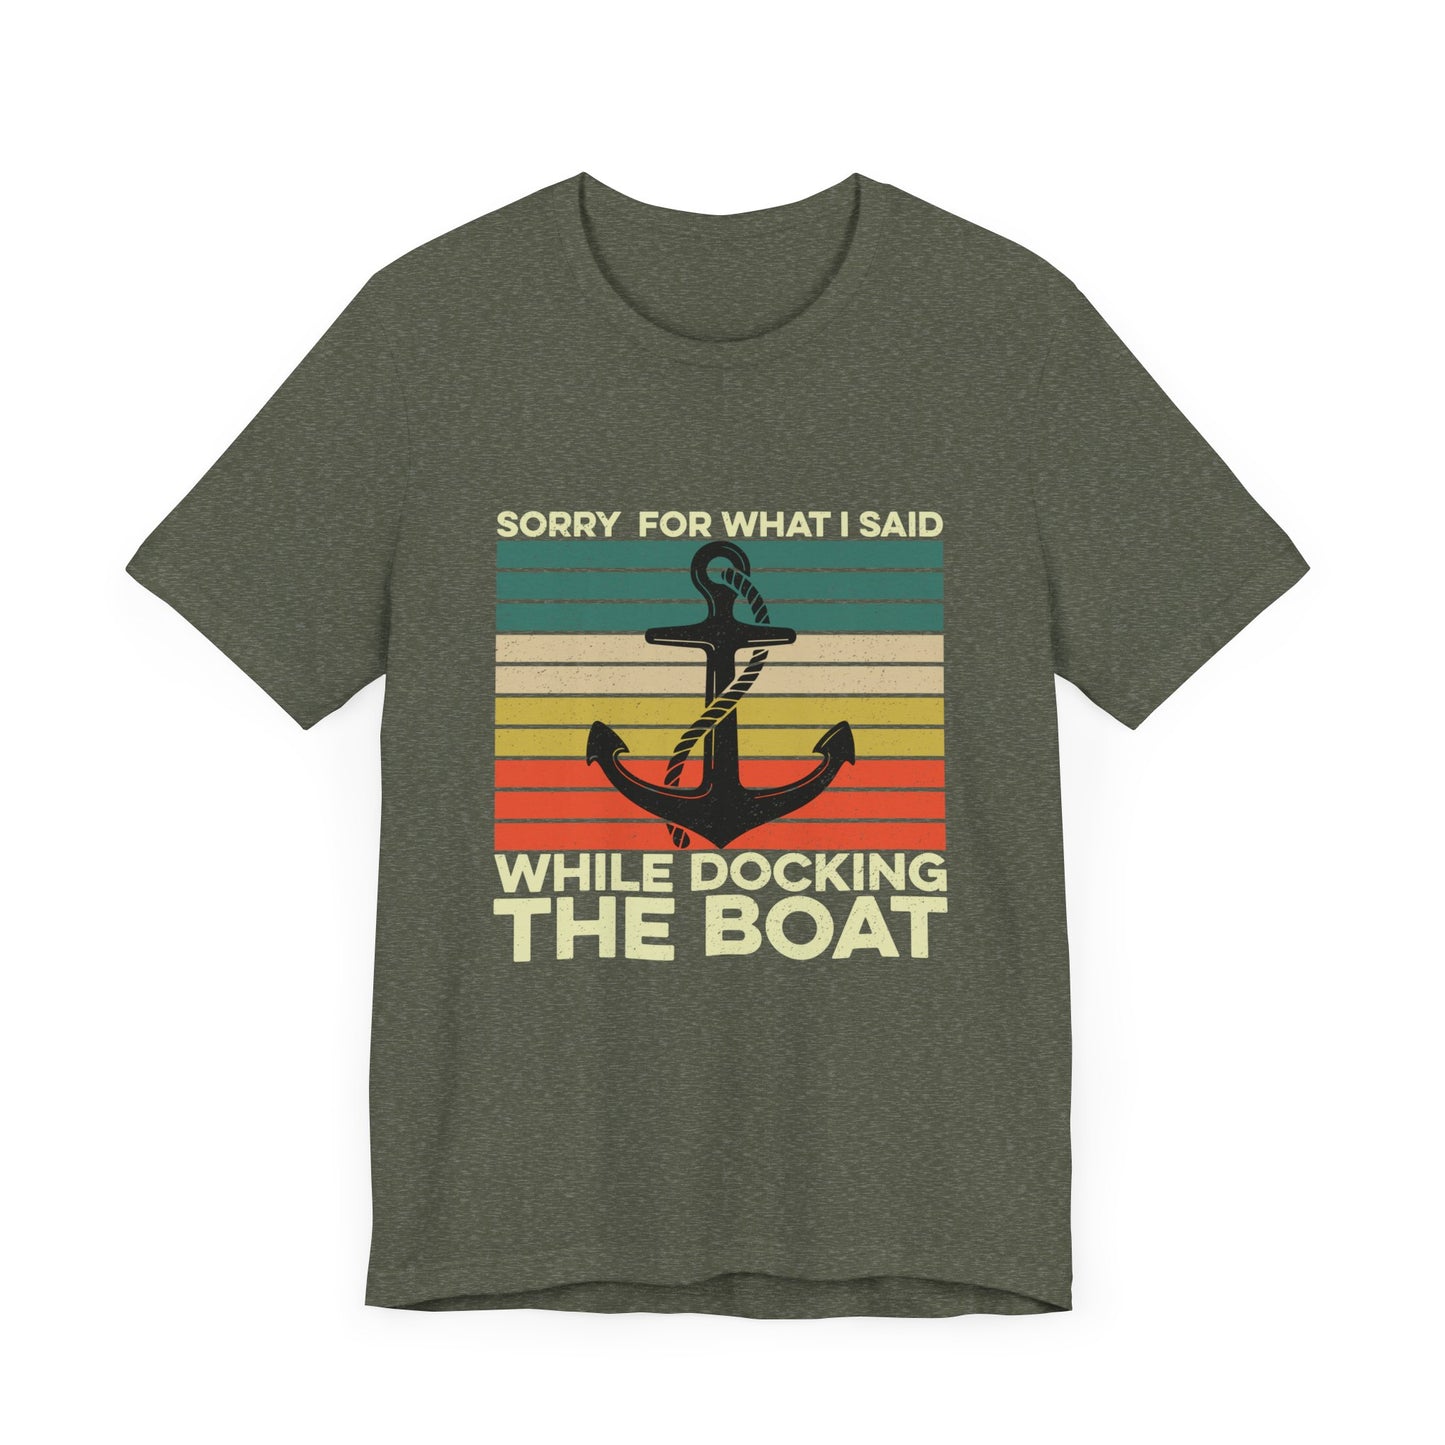 Sorry for What I Said While Docking the Boat Funny Short Sleeve Tee